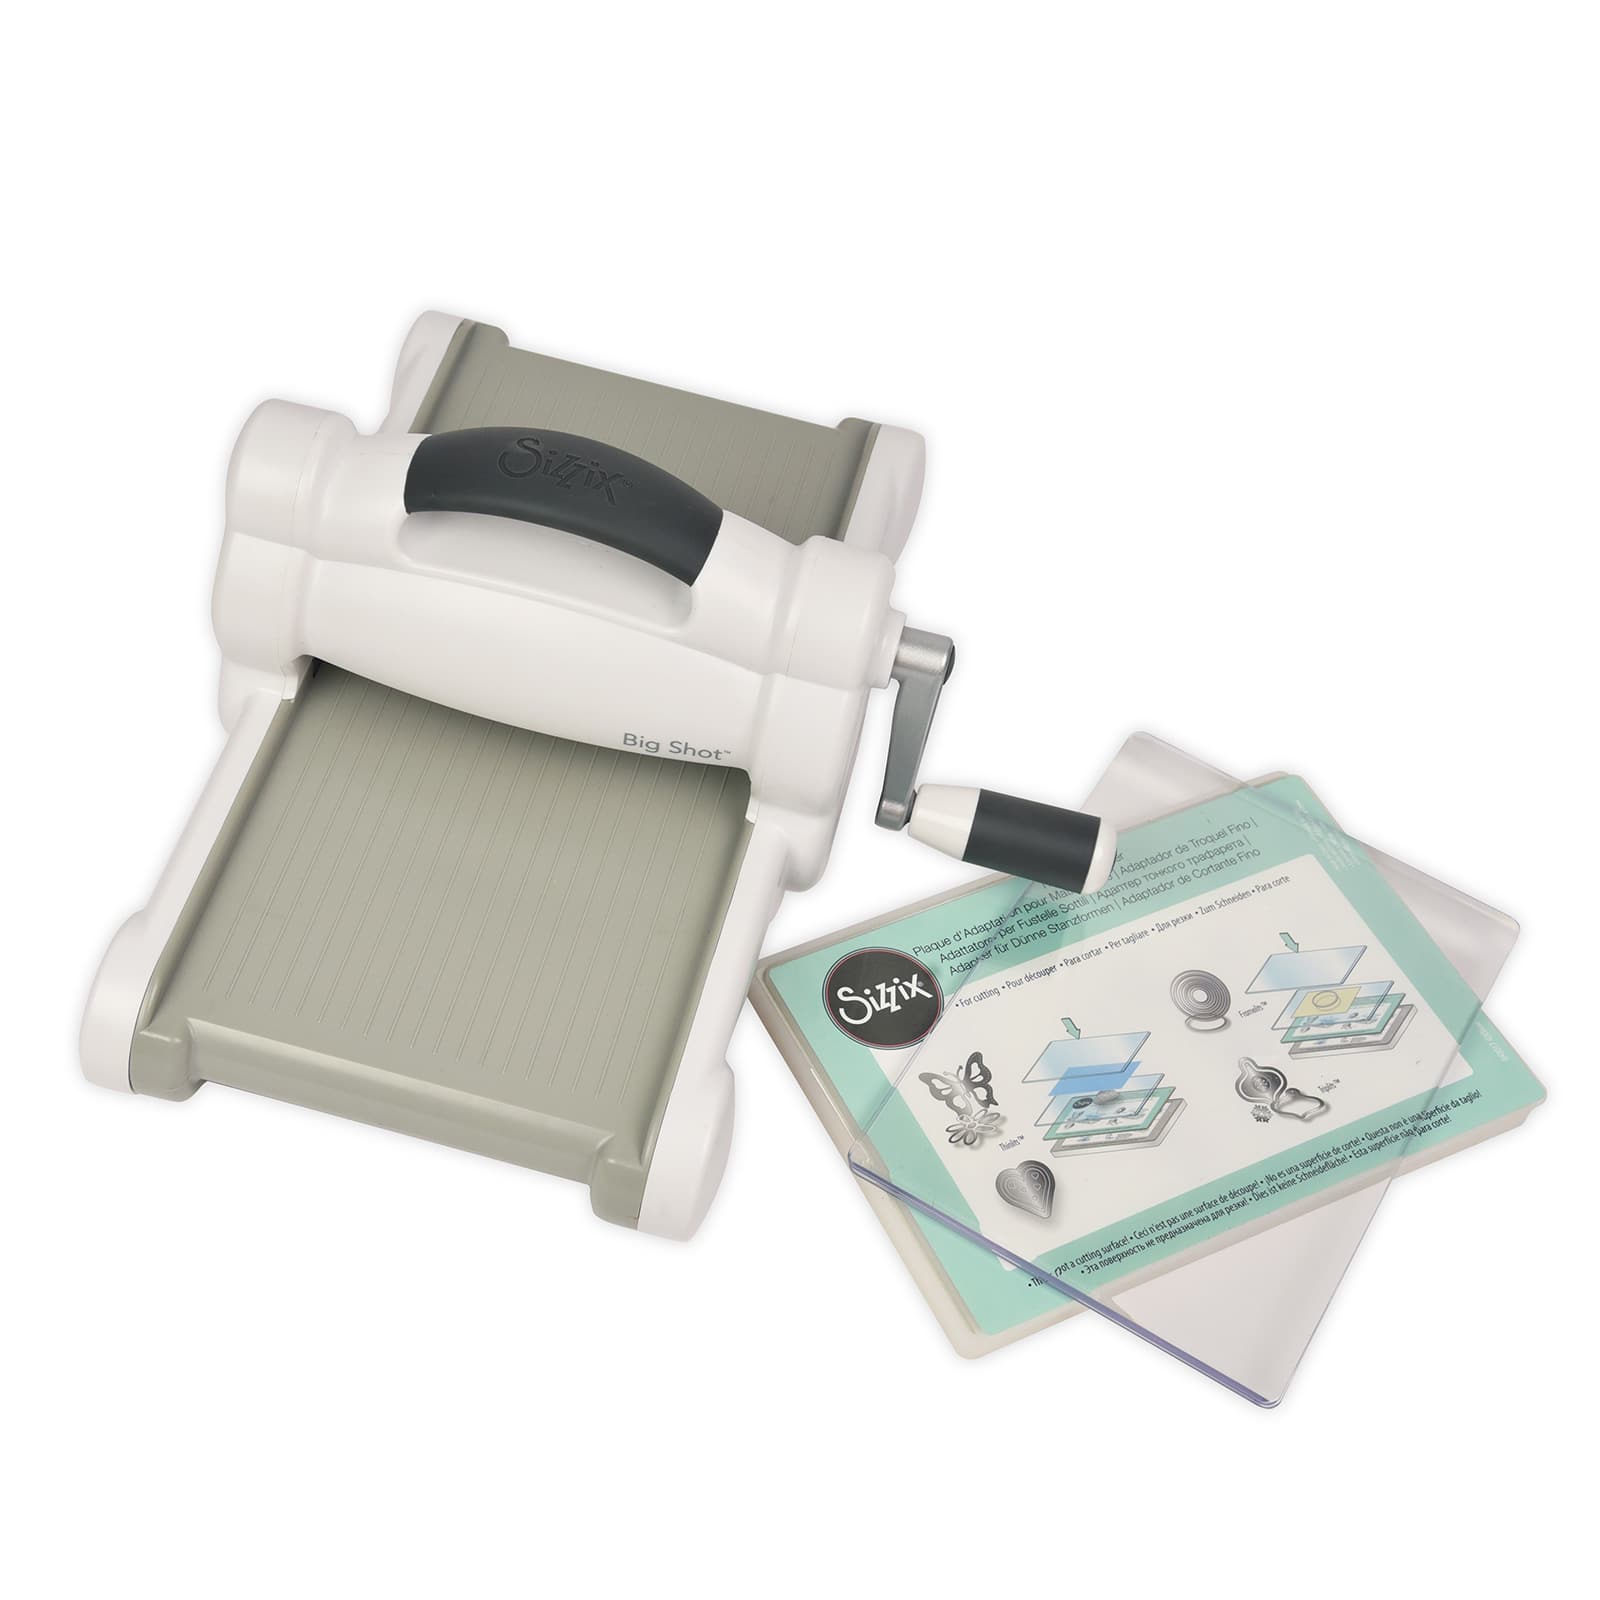 Sizzix Big Shot Express Machine Only - White & Gray - Marco's Paper